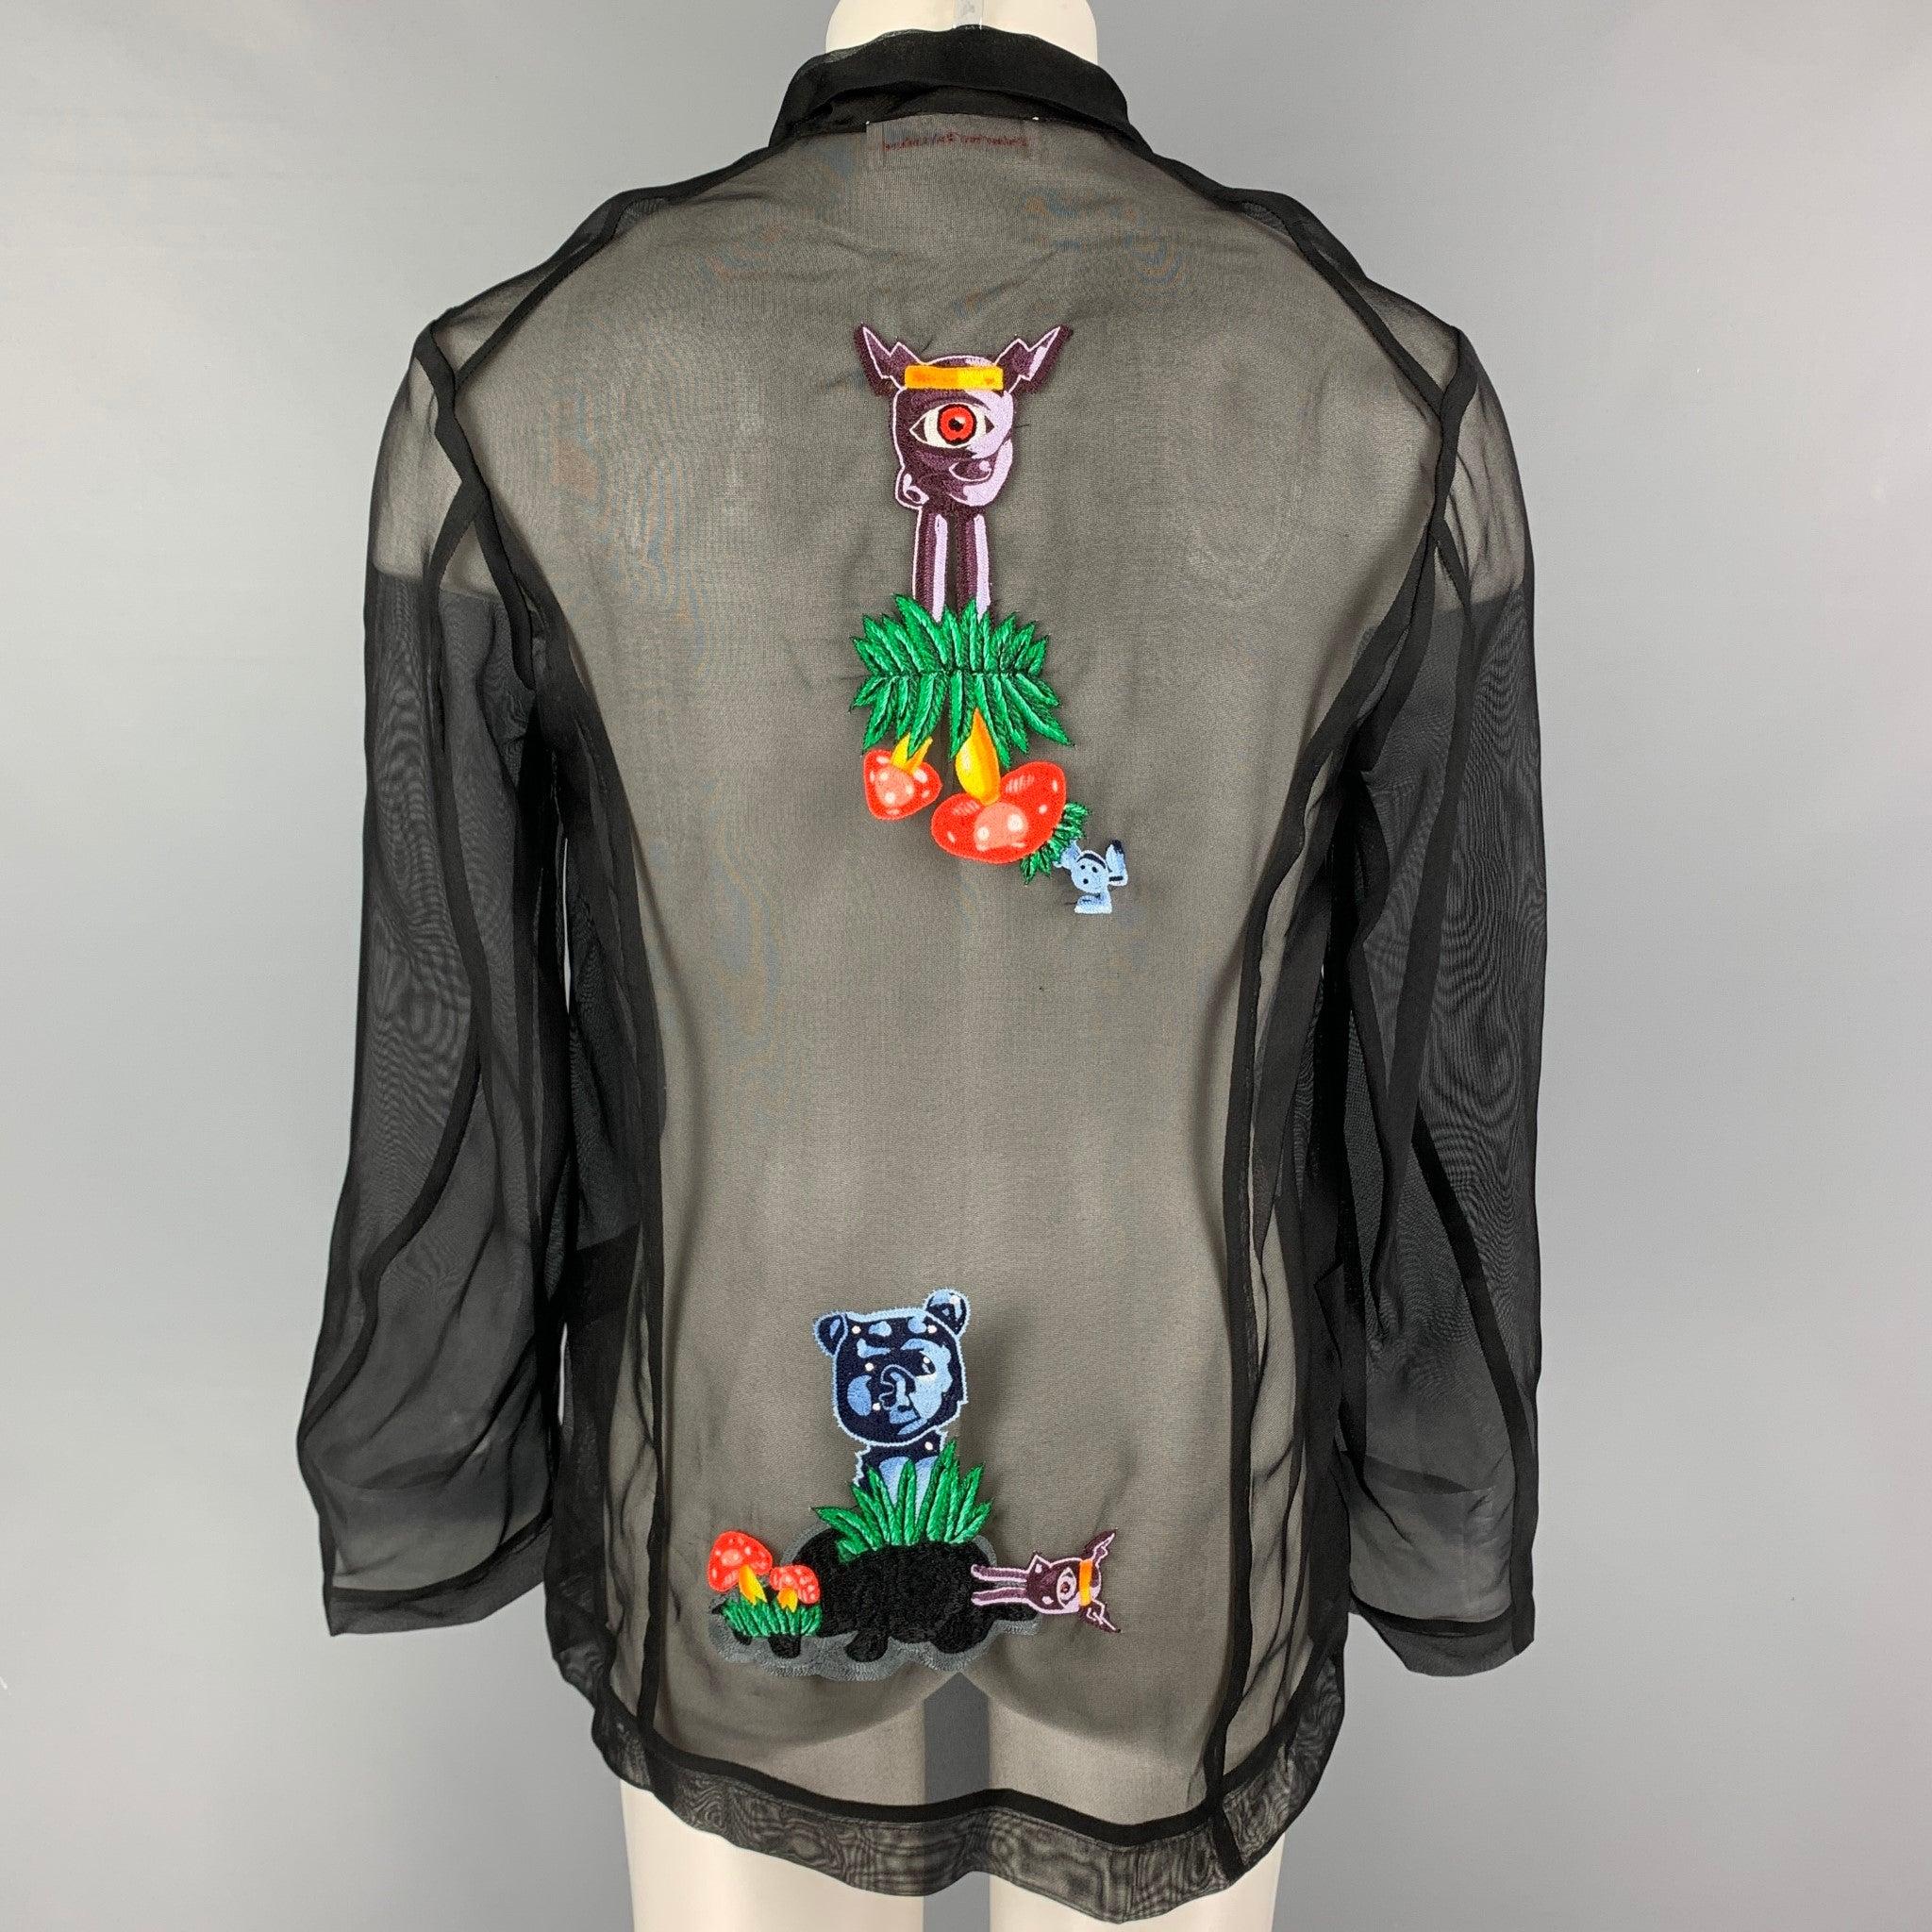 WALTER VAN BEIRENDONCK SS 16 Size 38 Black Multi-Color Silk Jacket In Good Condition For Sale In San Francisco, CA